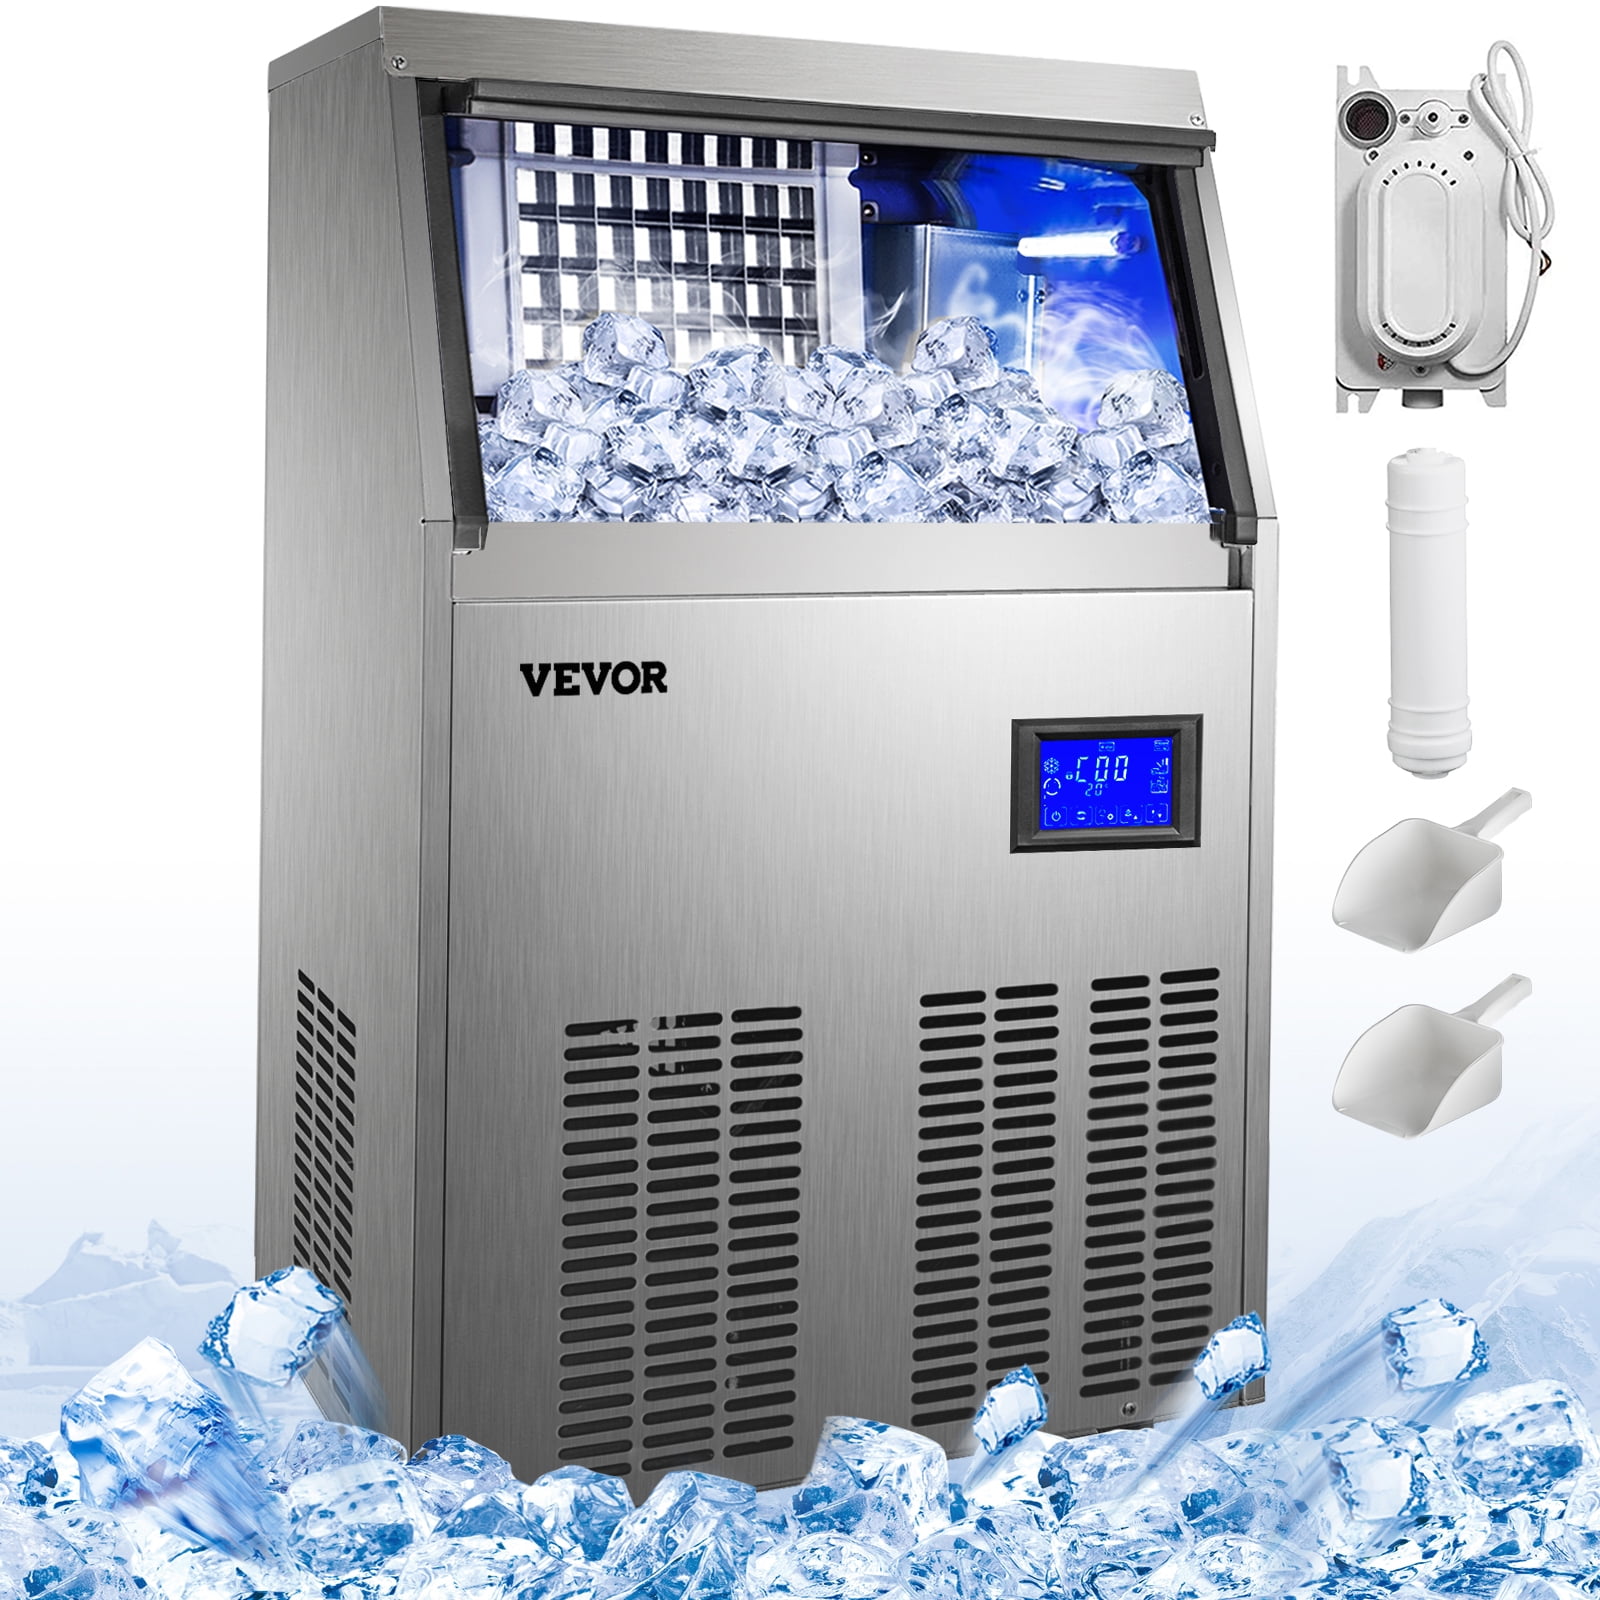 BuoQua 220V Commercial Ice Maker Stainless Steel Ice Cube Maker Machine 35KG 75LBS Countertop Ice Maker with Cool Water Dispenser Hospitals Office Space Saver 